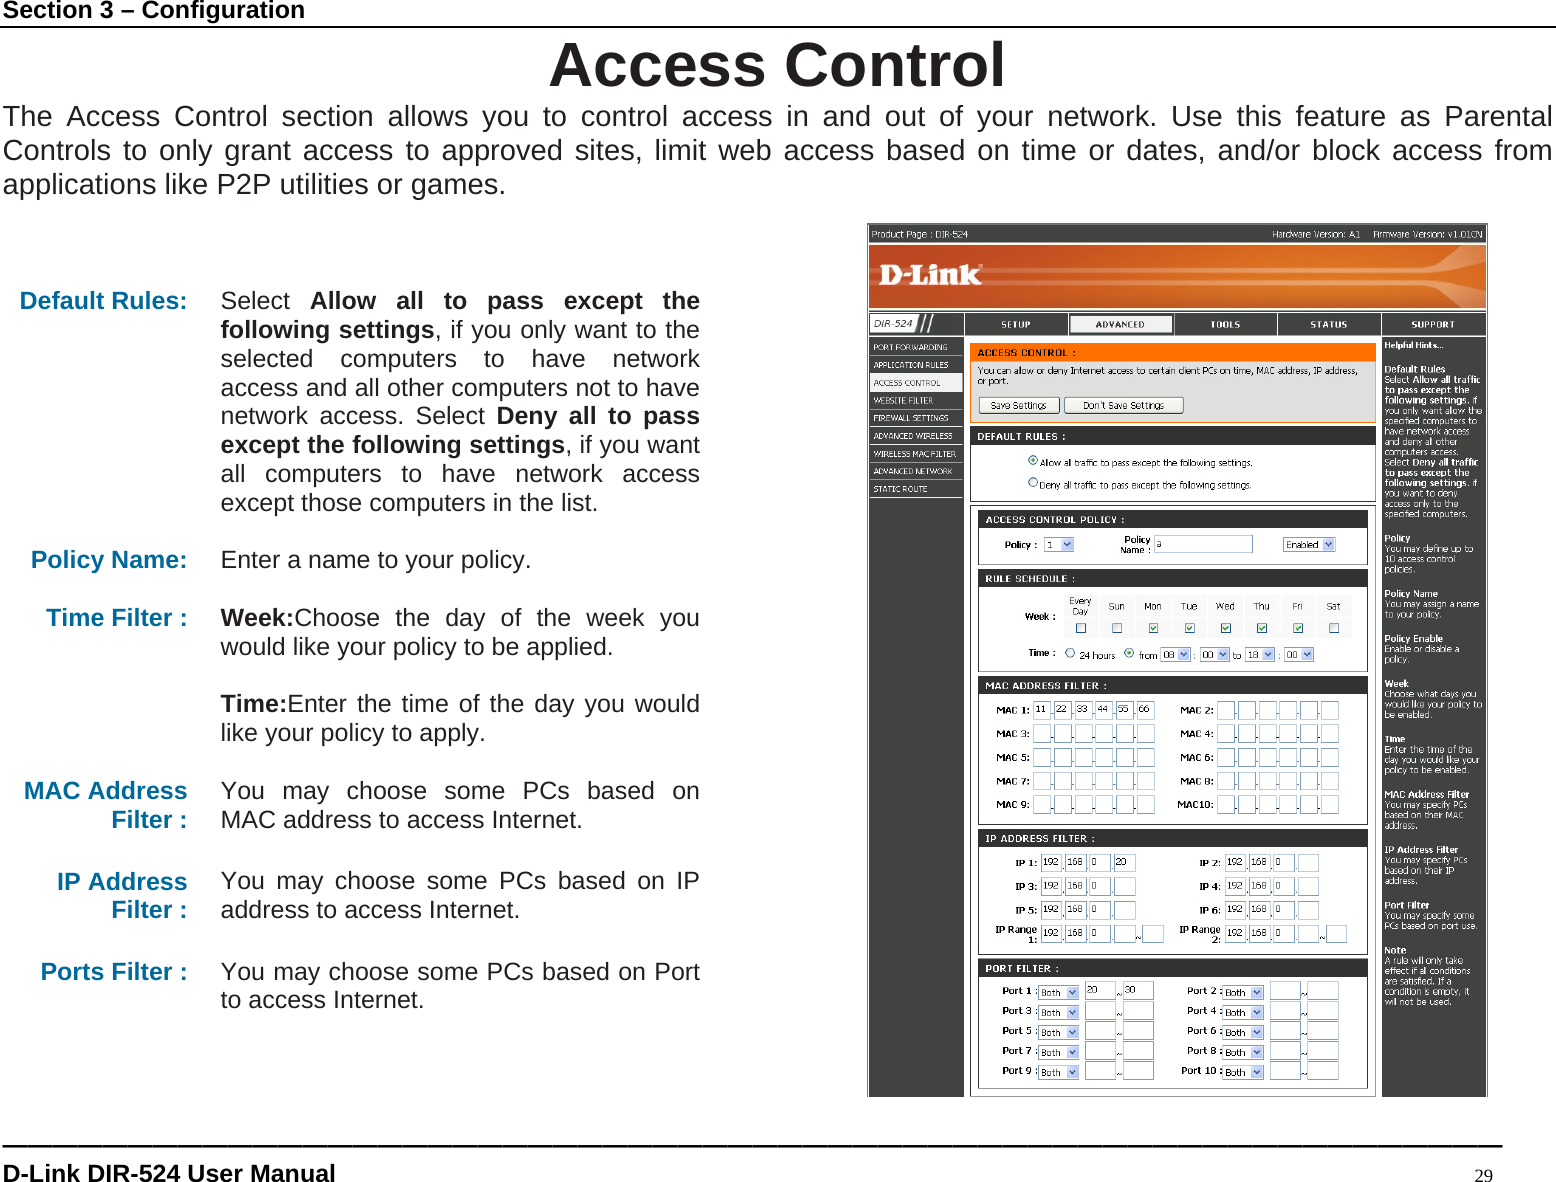 Section 3 – Configuration ———————————————————————————————————————————————————————————— D-Link DIR-524 User Manual                                                                                           29 Access Control The Access Control section allows you to control access in and out of your network. Use this feature as Parental Controls to only grant access to approved sites, limit web access based on time or dates, and/or block access from applications like P2P utilities or games.    Default Rules: Select  Allow all to pass except the following settings, if you only want to the selected computers to have network access and all other computers not to have network access. Select Deny all to pass except the following settings, if you want all computers to have network access except those computers in the list.  Policy Name:  Enter a name to your policy.  Time Filter :  Week:Choose the day of the week you would like your policy to be applied.  Time:Enter the time of the day you would like your policy to apply.  MAC Address Filter :  You may choose some PCs based on MAC address to access Internet.  IP Address Filter :  You may choose some PCs based on IP address to access Internet.  Ports Filter :  You may choose some PCs based on Port to access Internet.    